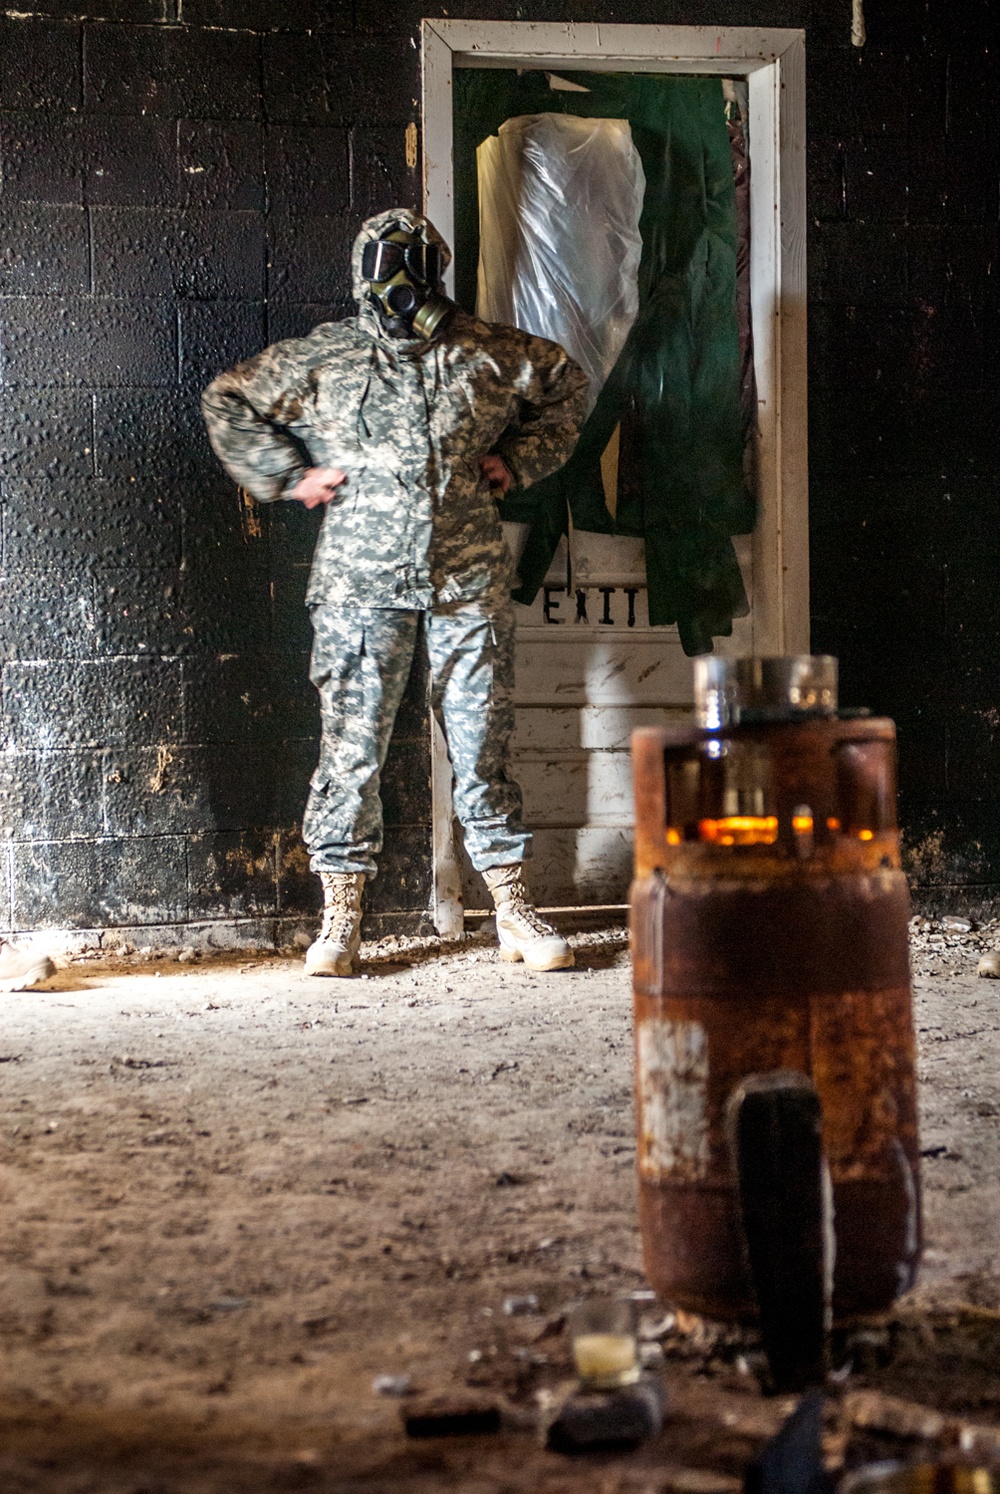 Nuclear Biological and Chemical training qualification at Camp Atterbury